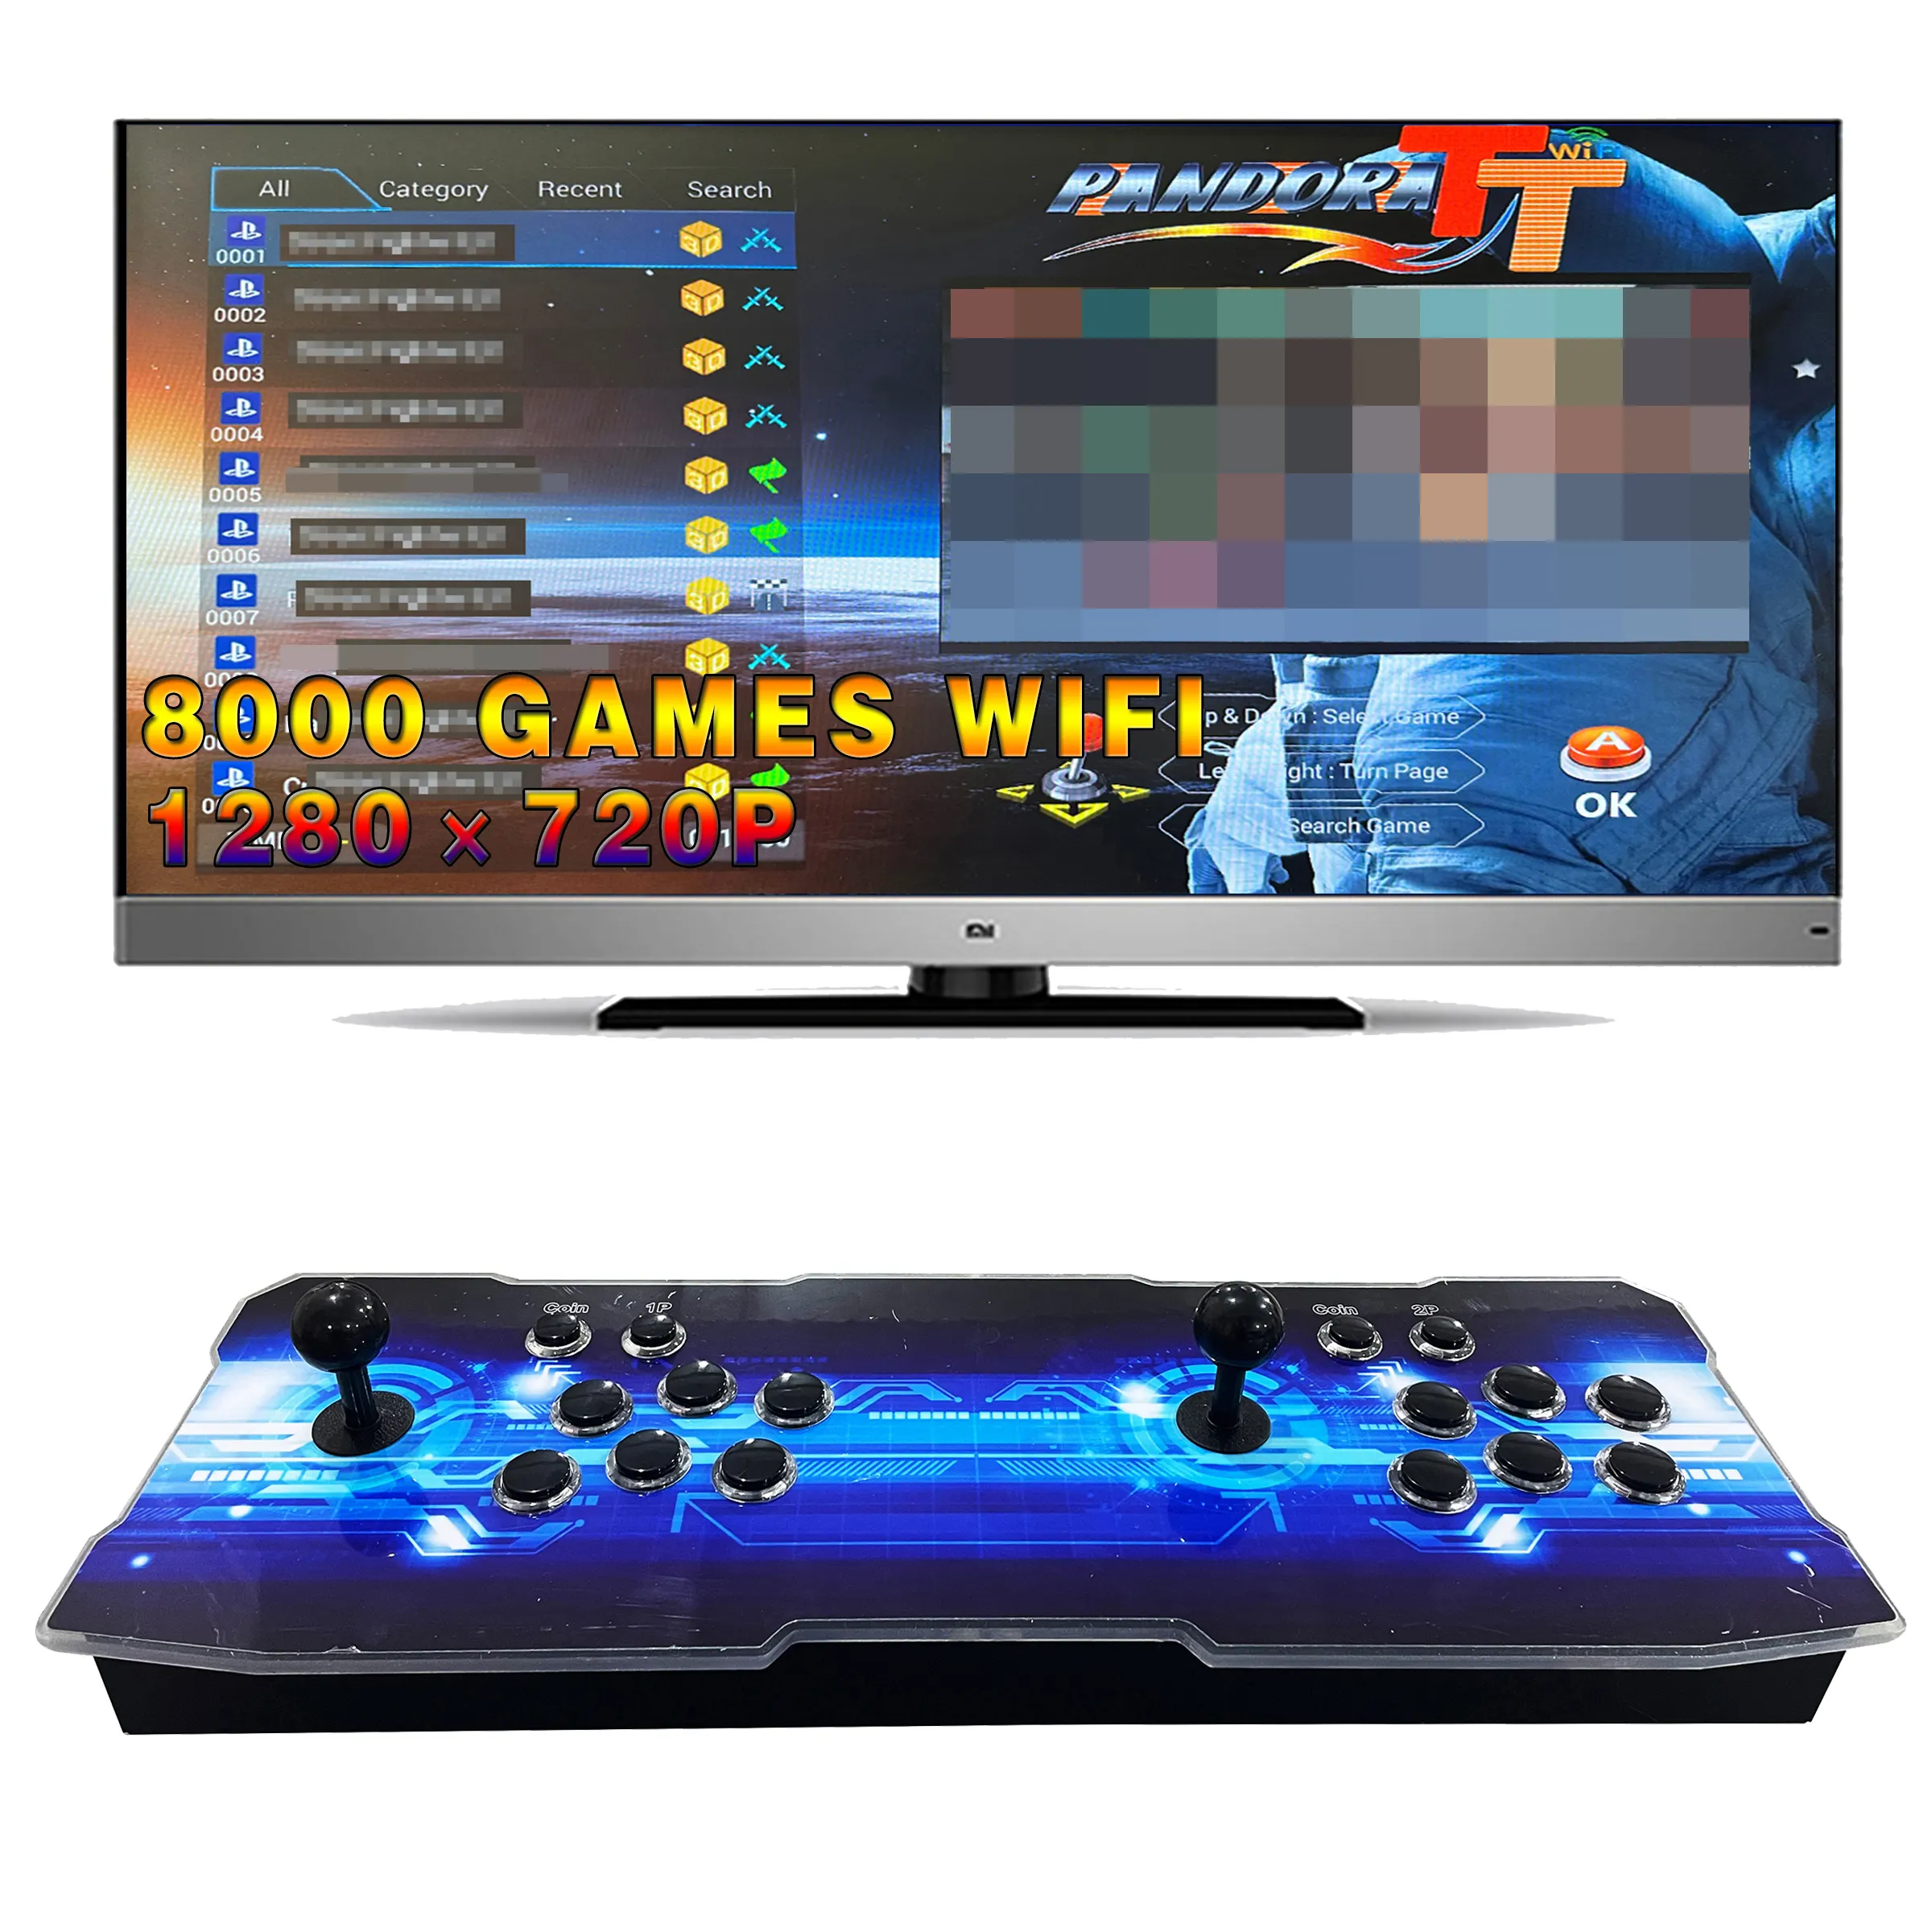 3D Wifi Pandora Saga Game Box 8000 in 1 150 3D Games Vintage Arcade Support for 4 Players to Download Games for Free